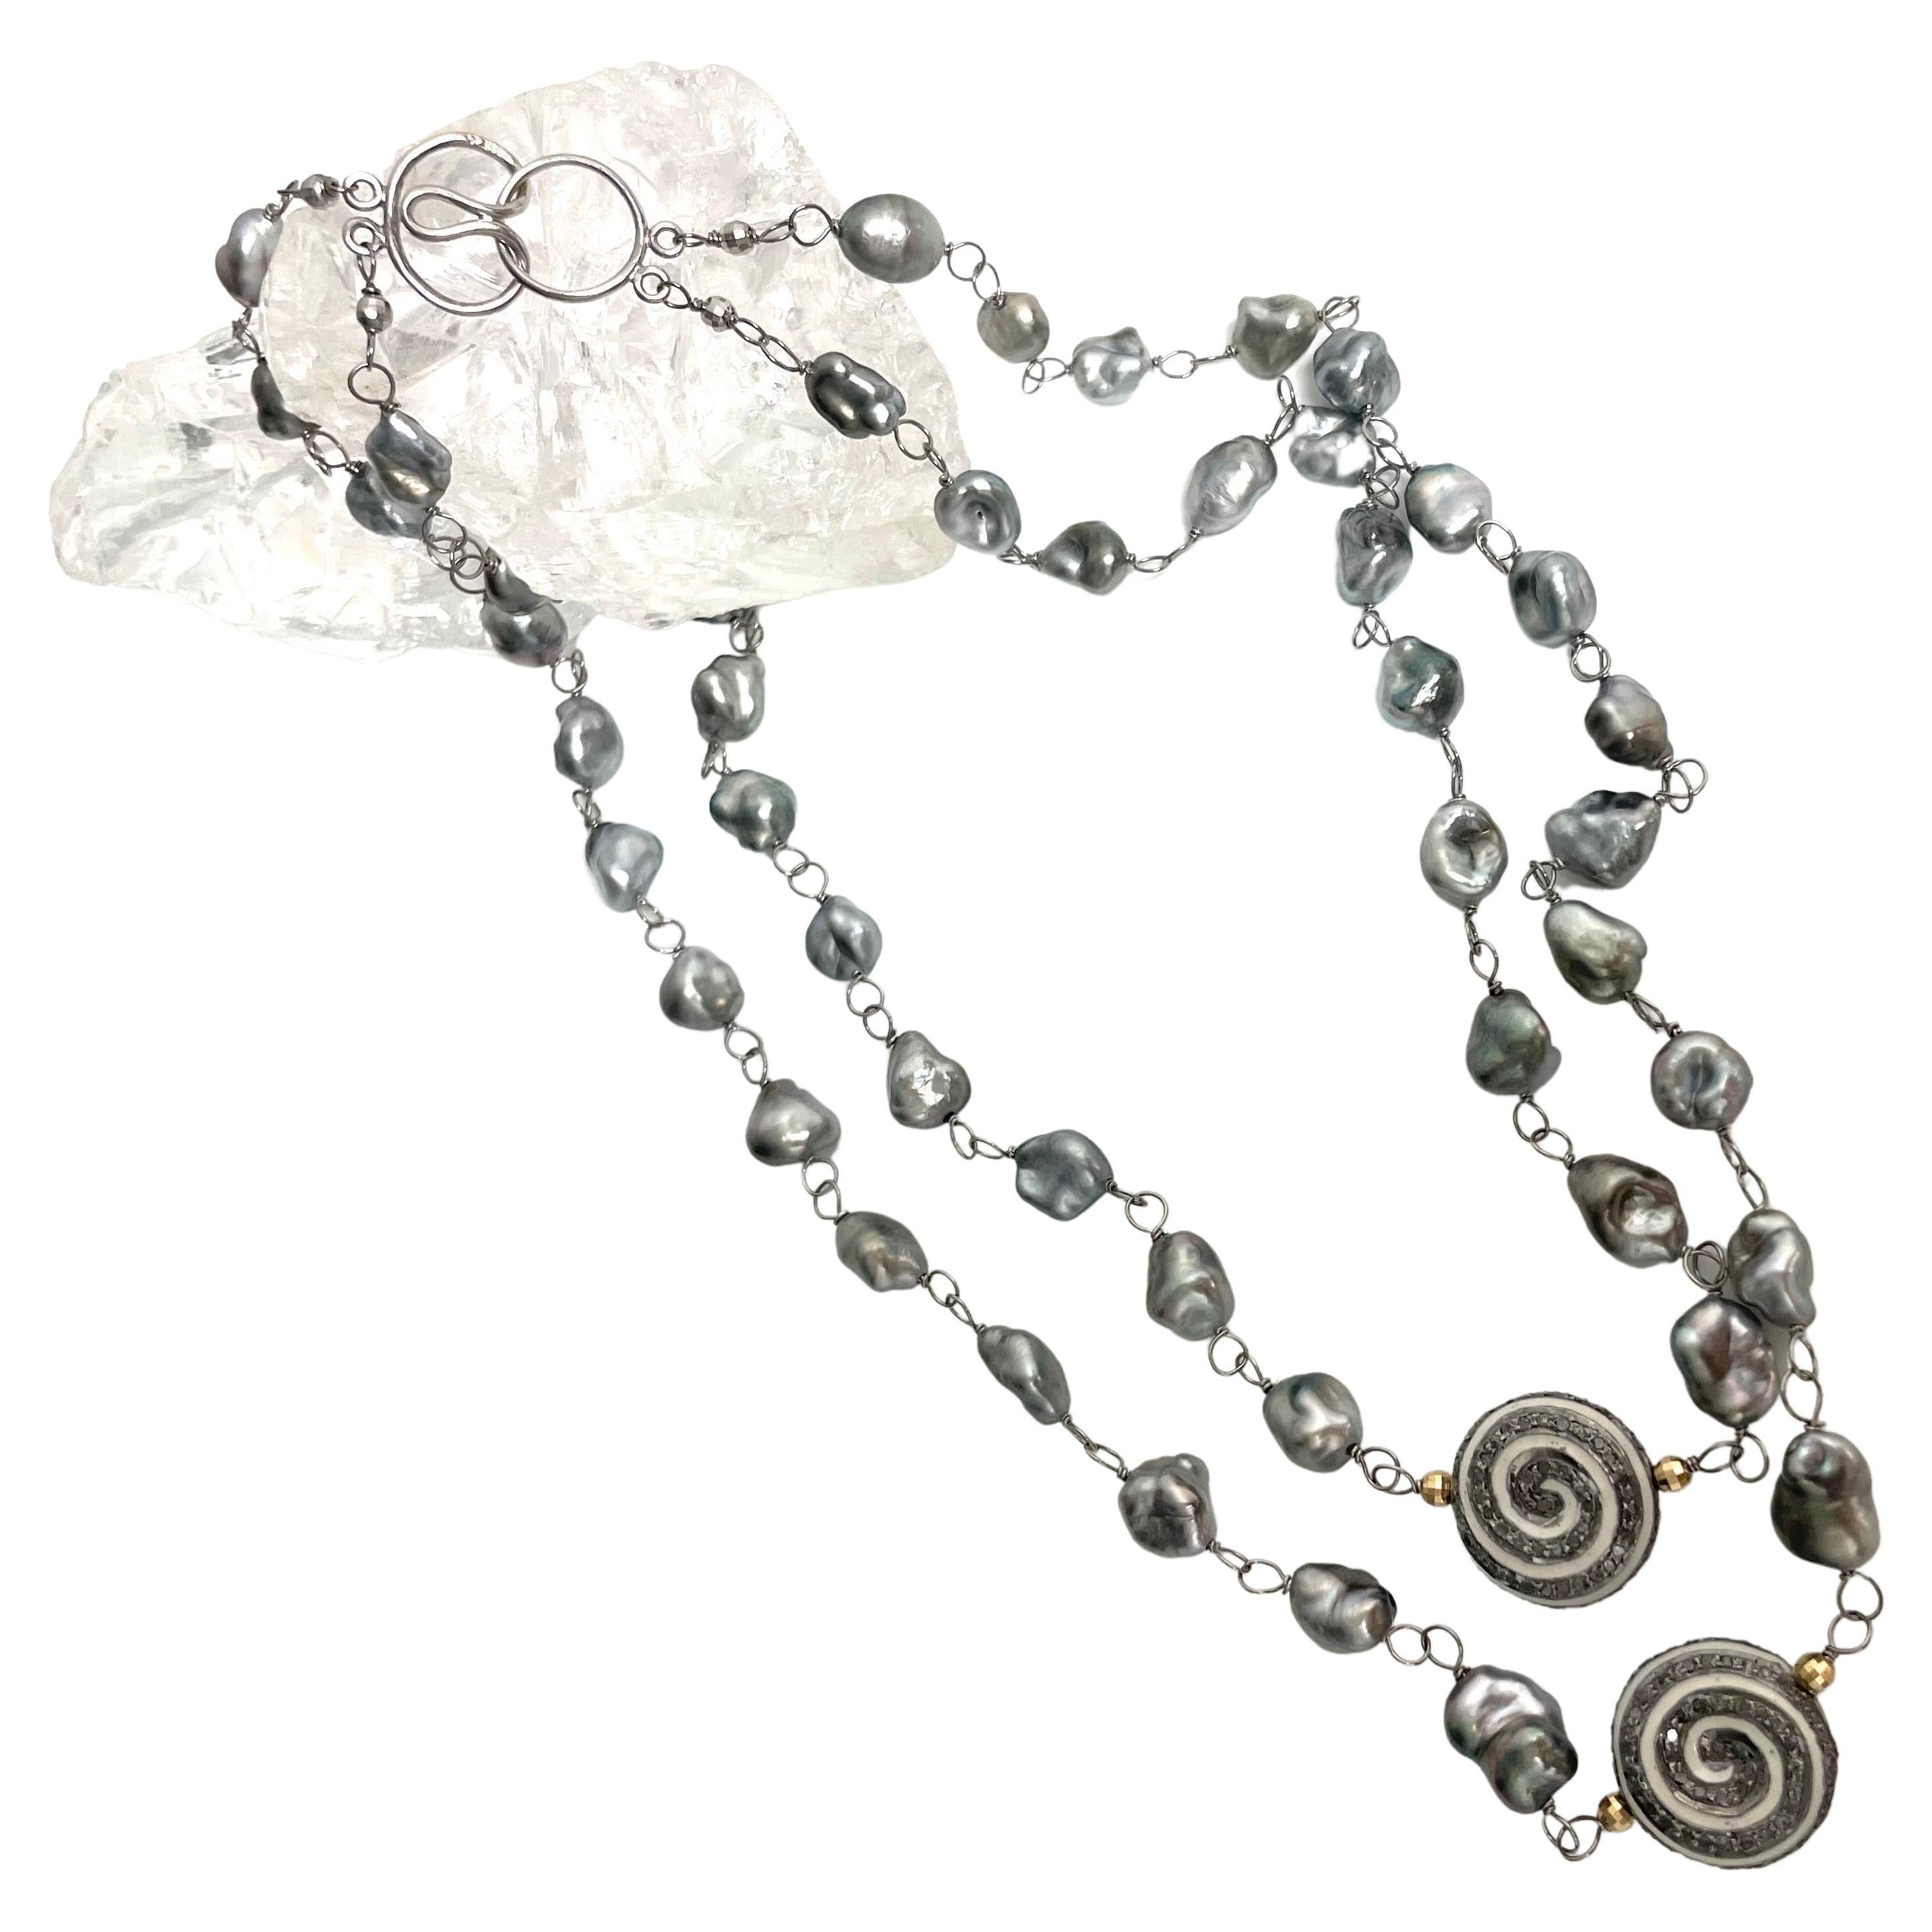 Description
Tahitian Keshi pearls with enamel and pave diamond pinwheels accented with 14k gold faceted balls, double strand necklace.
Item # N3714

Materials and Weight
Tahitian Keshi pearls, 8-9mm
Pave diamonds 2.12cts
Enamel
Faceted balls 3mm 14k